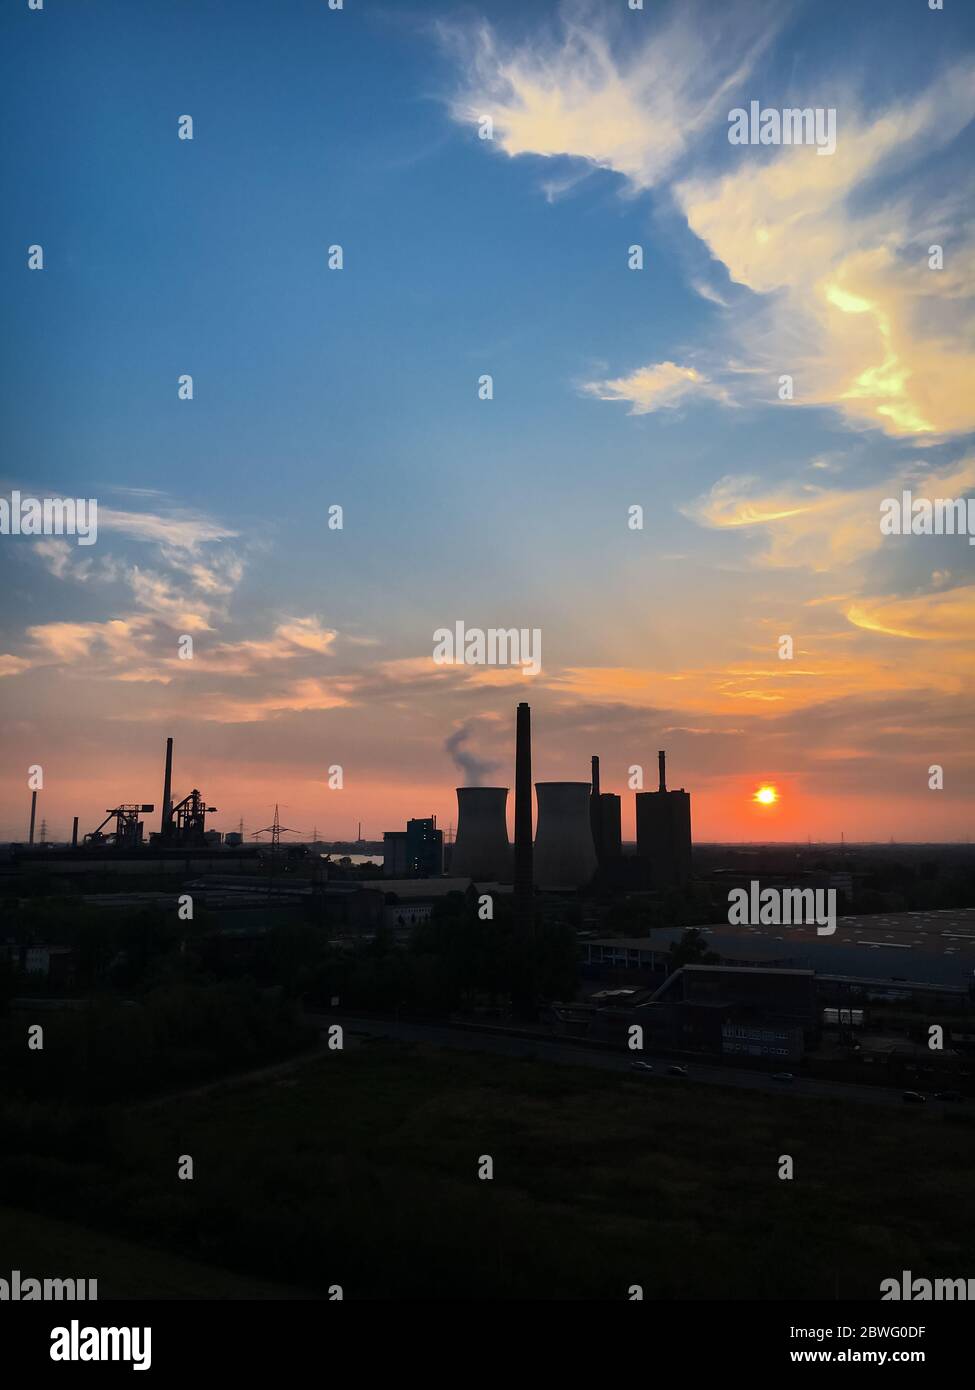 Duisburg, Germany – August 28, 2018: Scenic view of power station and cooling tower of „RWE Power AG“ at sunset against colorful sky Stock Photo